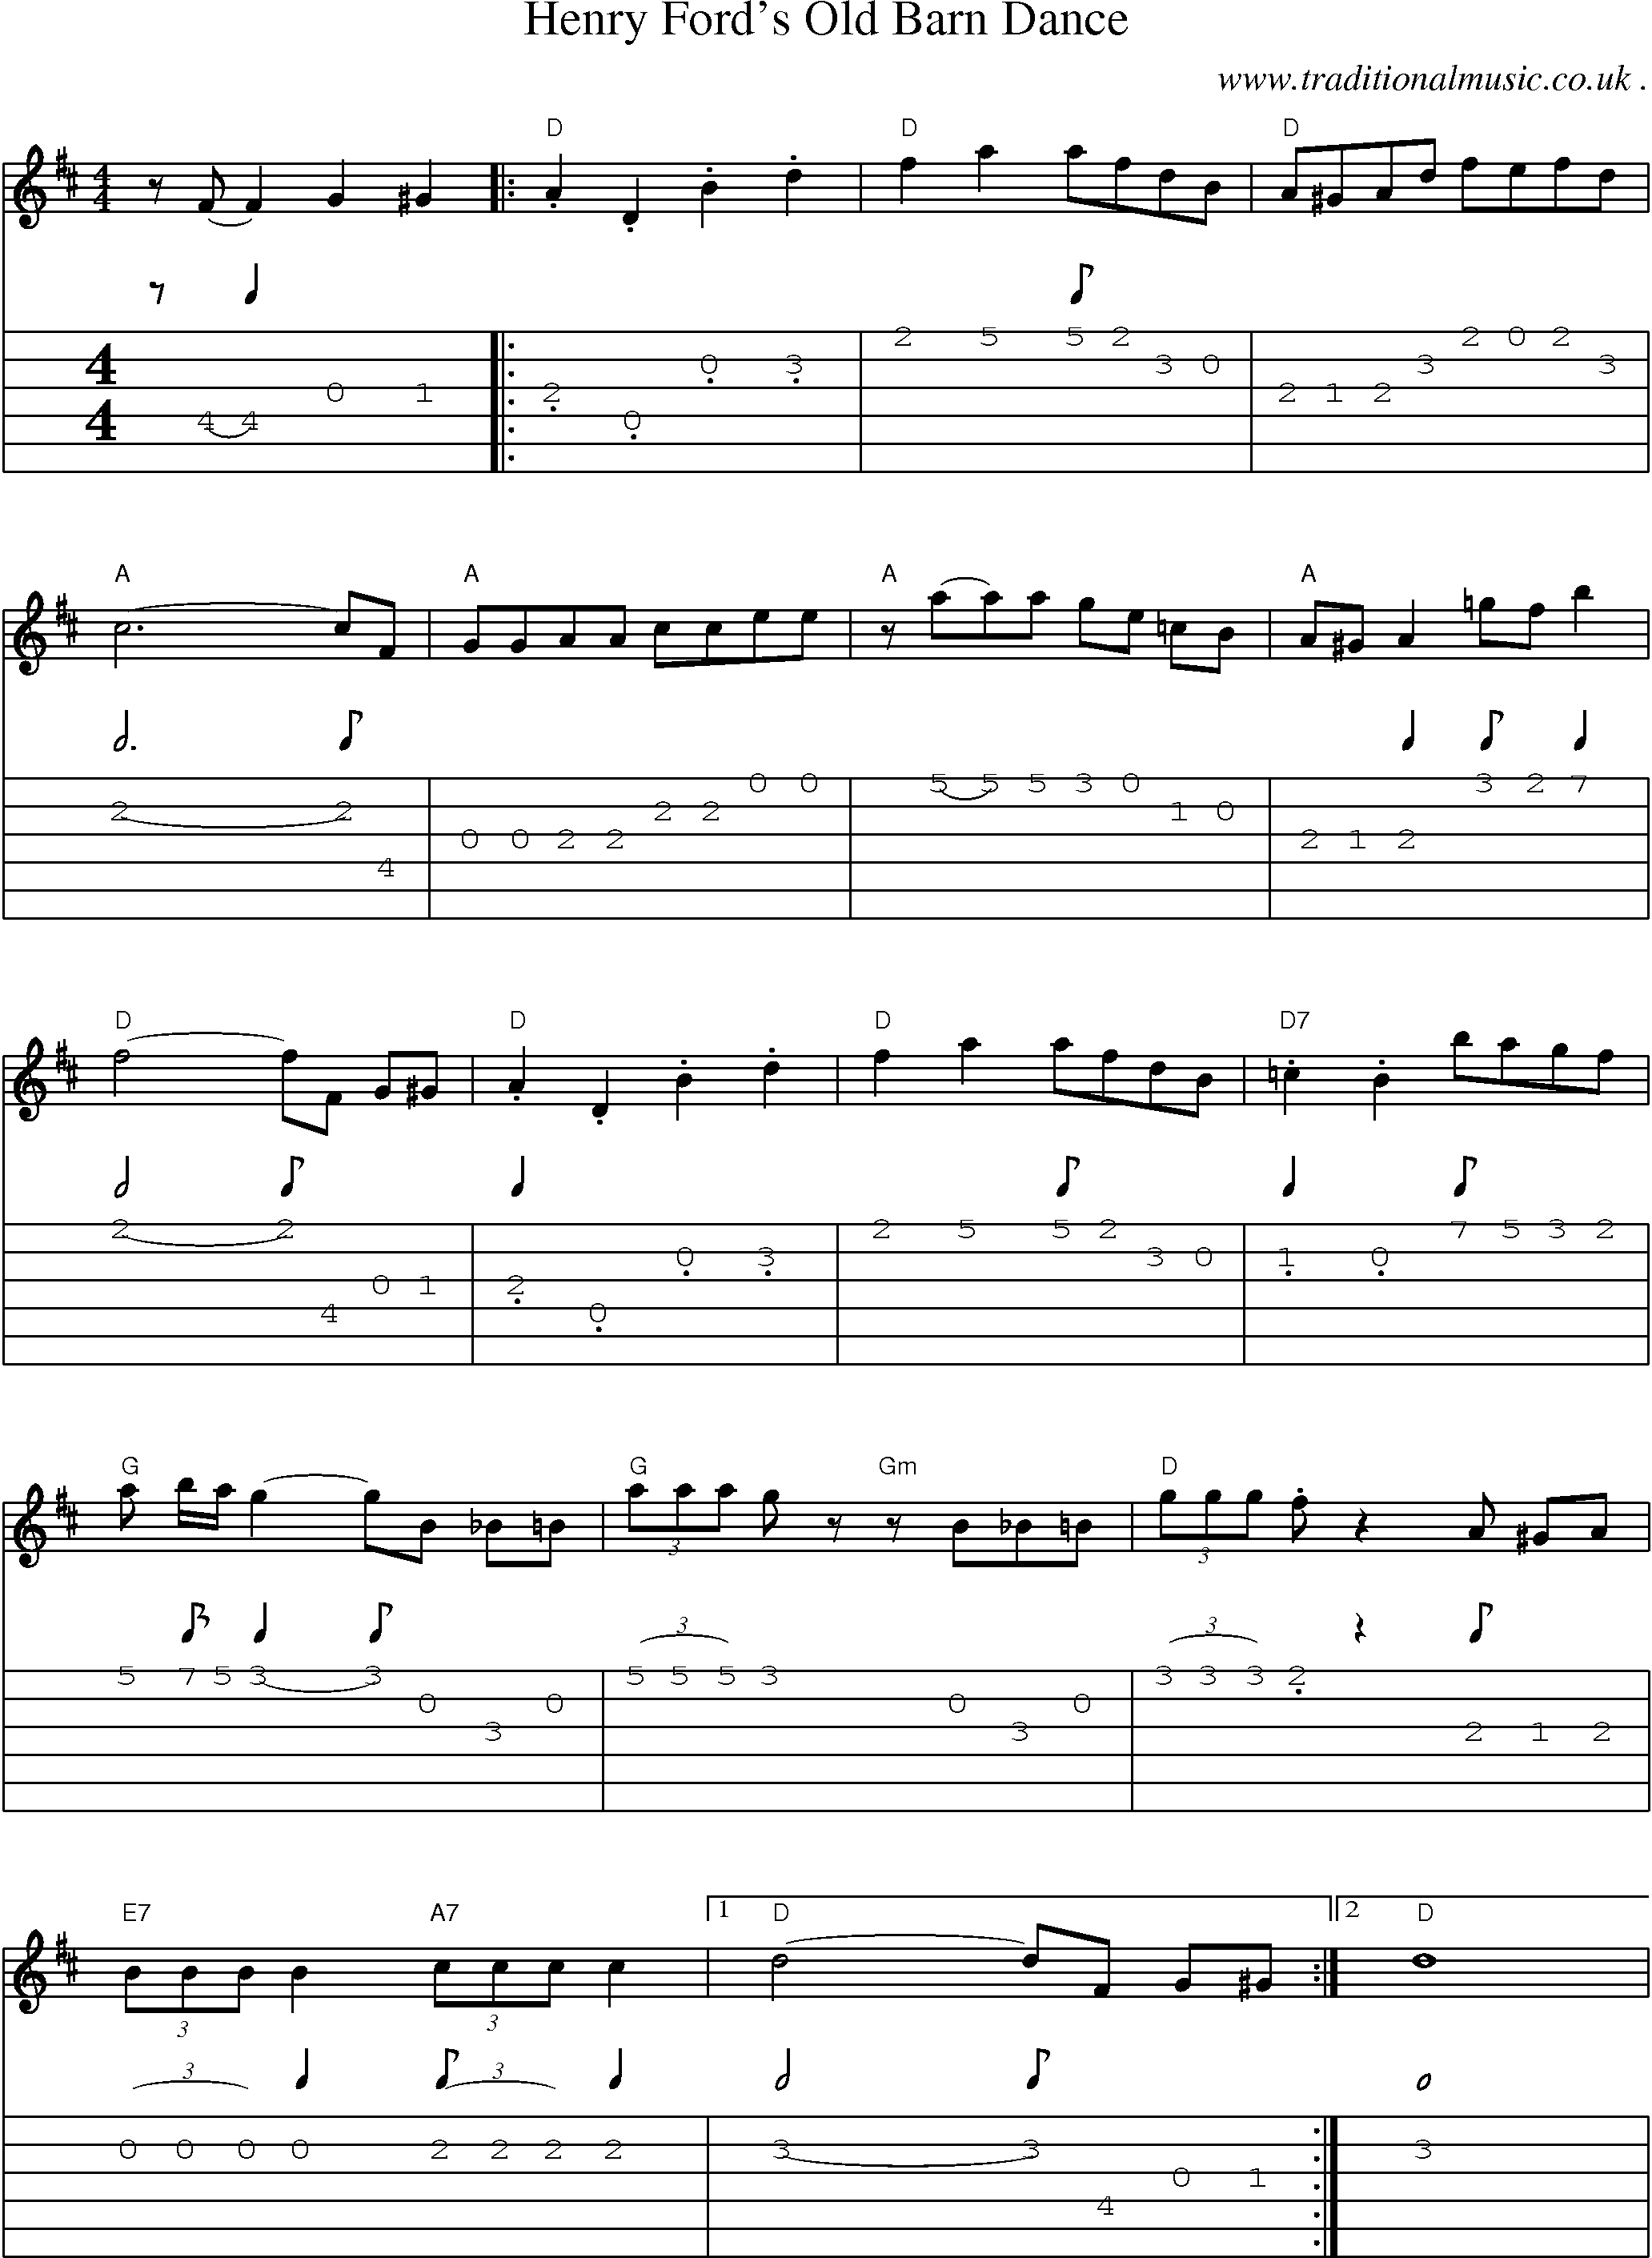 Sheet-Music and Guitar Tabs for Henry Fords Old Barn Dance